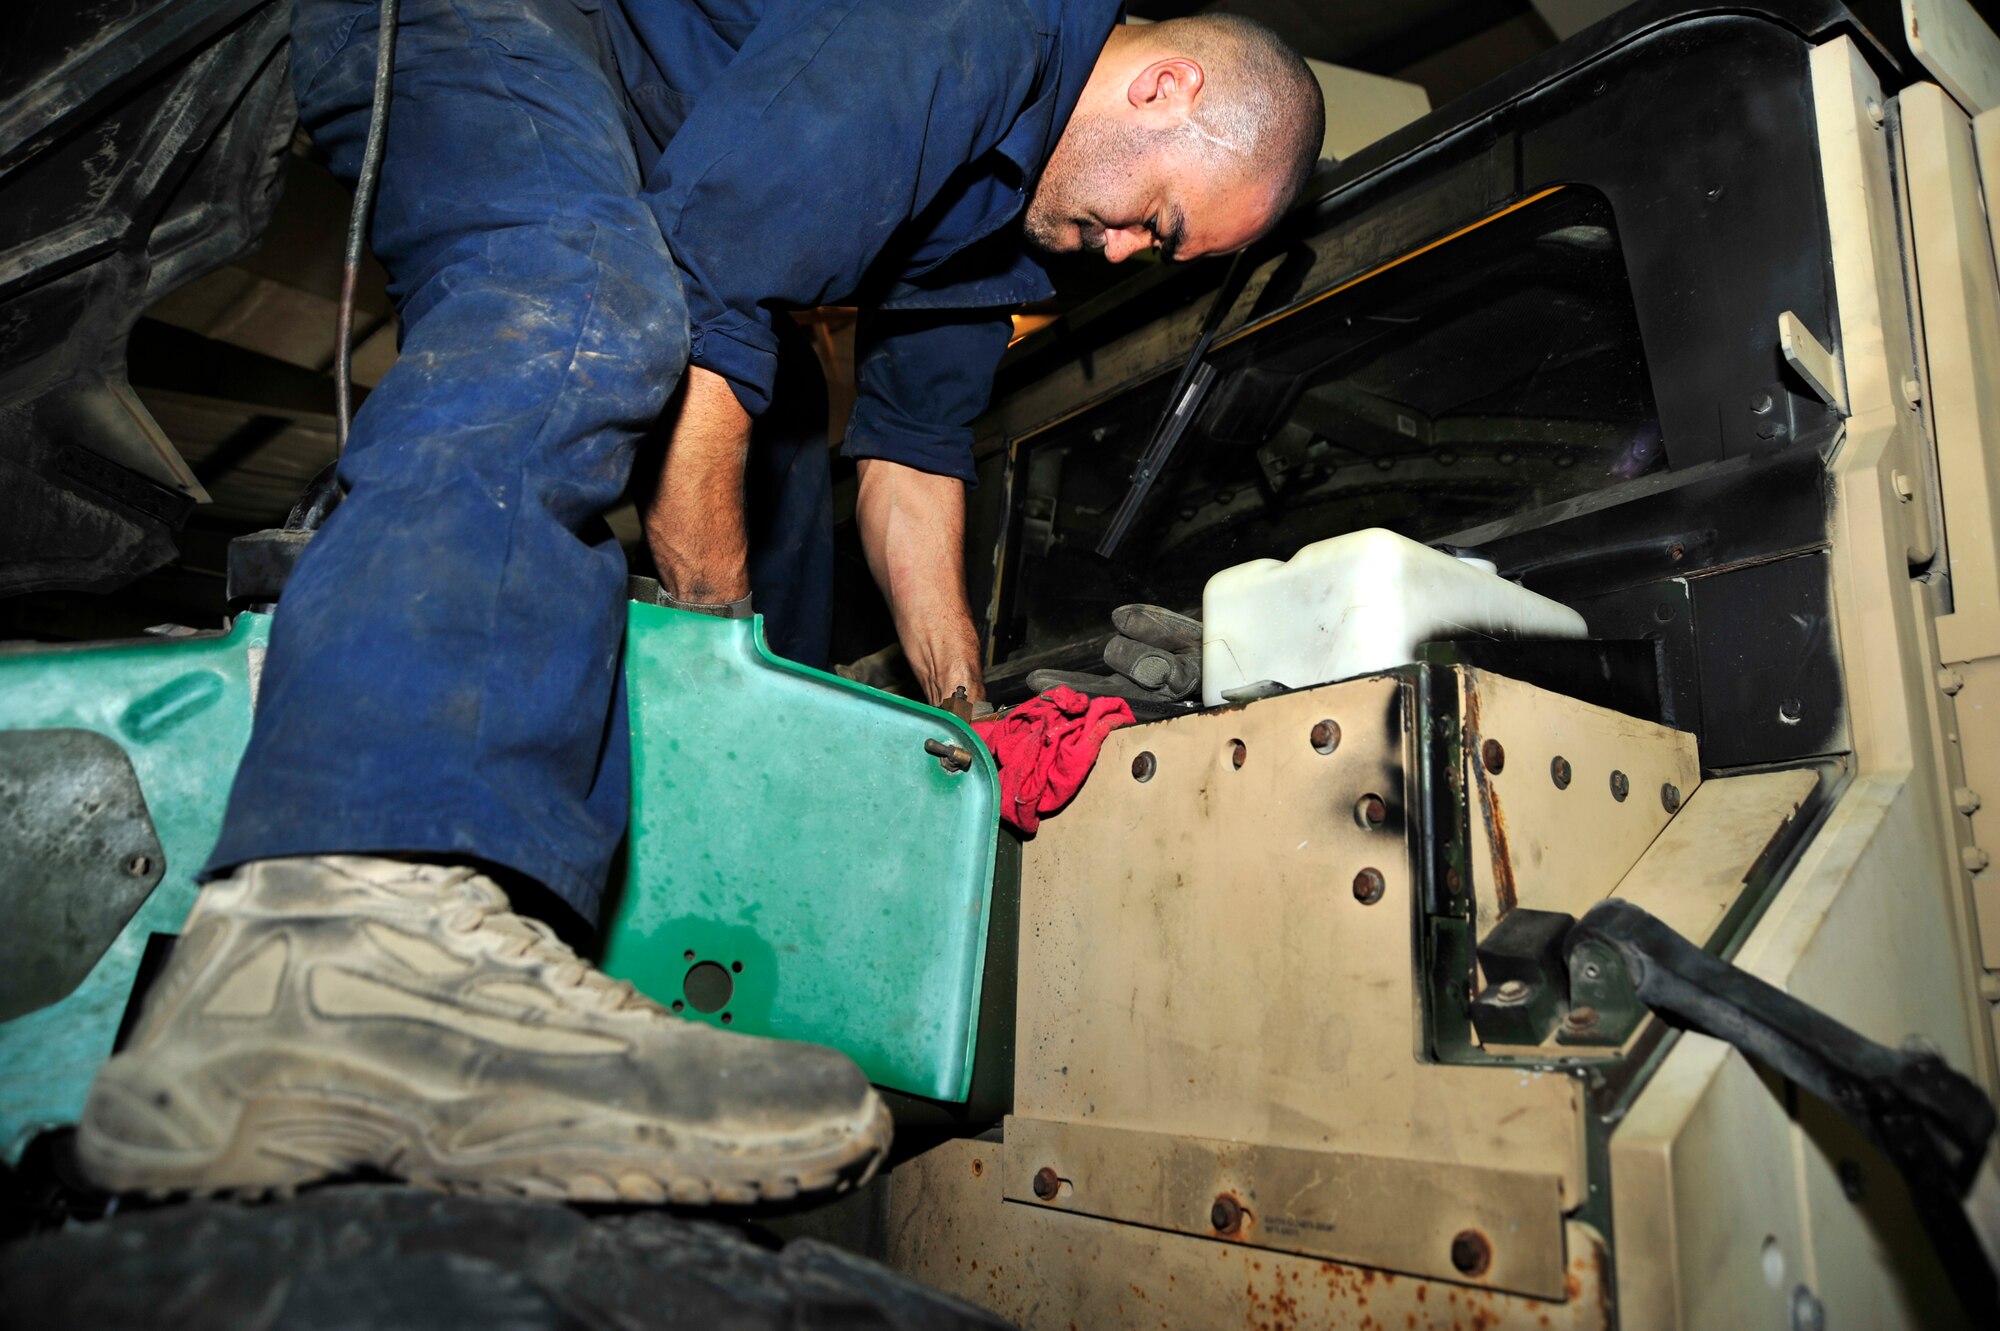 SOUTHWEST ASIA - Staff Sgt. Oscar Feliciano, 380th Expeditionary Logistics Readiness Squadron, removes an alternator so it can be replaced on a HMMVW (High-mobility multipurpose wheeled vehicle) Dec. 8, 2009. Sergeant Feliciano is deployed from the 217th Electronics Installation Squadron in Springfield, Ill., and calls Chicago, Ill., home. (U.S. Air Force photo/Senior Airman Stephen Linch)

 
